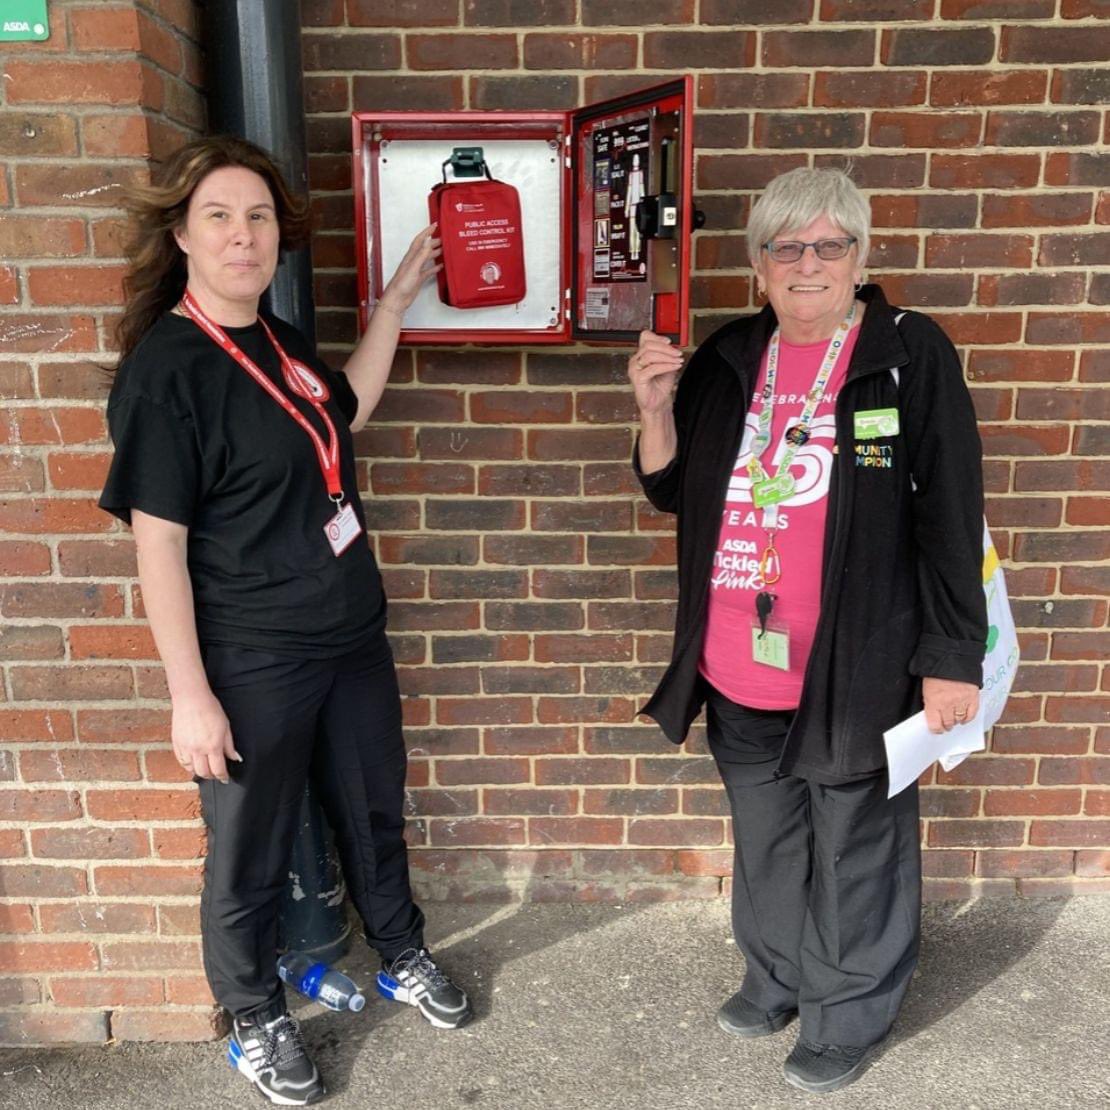 Amazing to see a new bleed control kit installed outside Asda Whitchurch in south Bristol. These kits are so vital right now as they treat stab victims. I hope to see more of them rolled out across the city soon to stop more lives being lost to knife crime